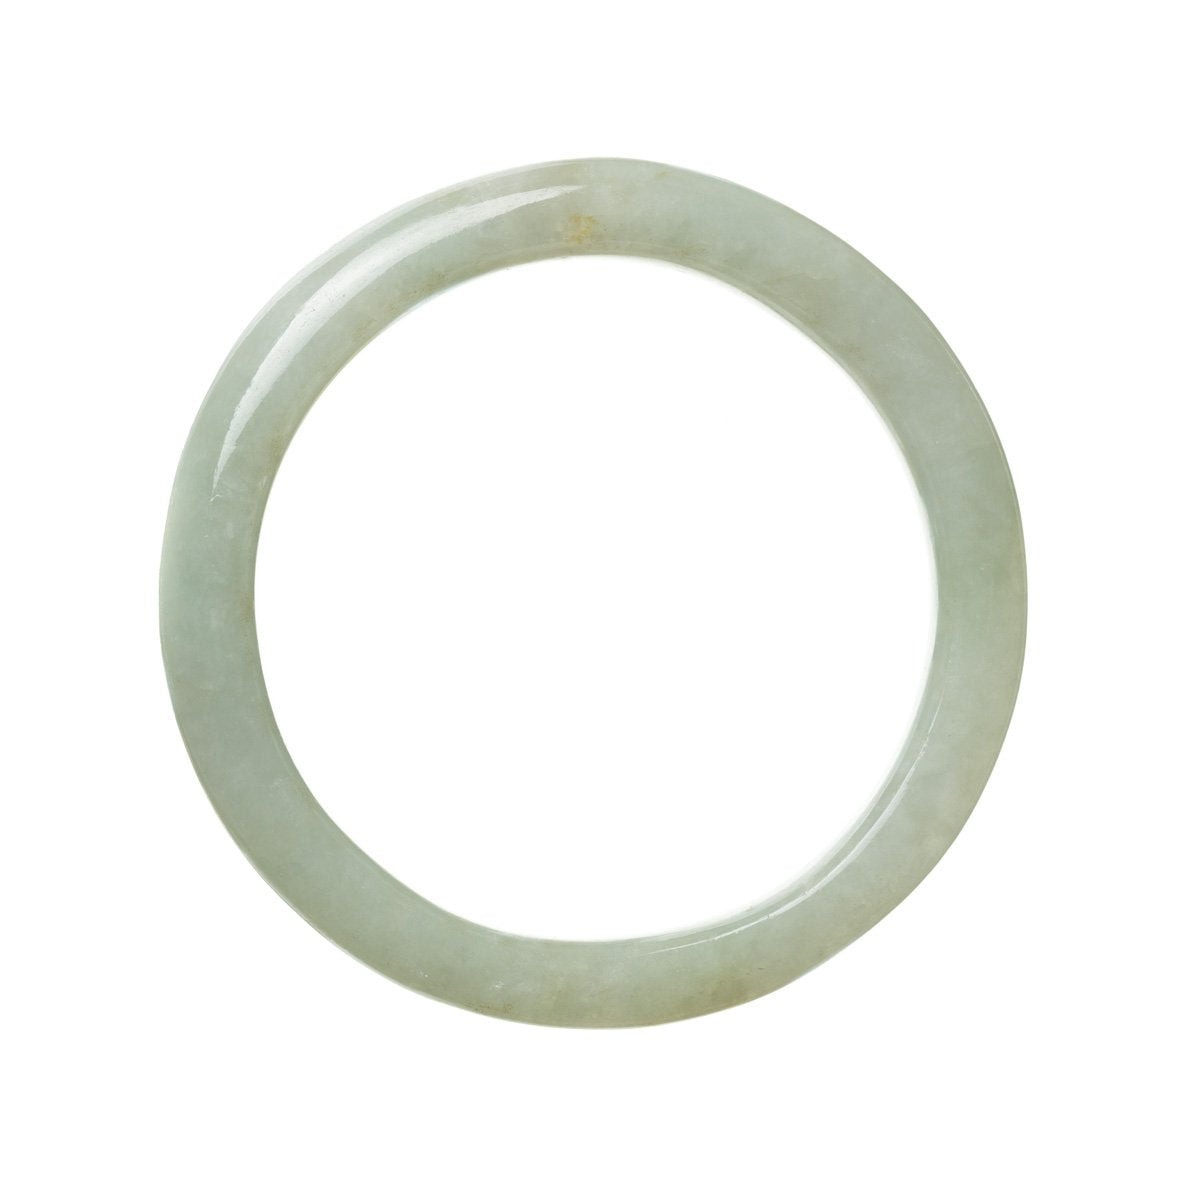 A beautiful pale green jadeite bangle bracelet, untreated and genuine, with a semi-round shape and a diameter of 62mm.